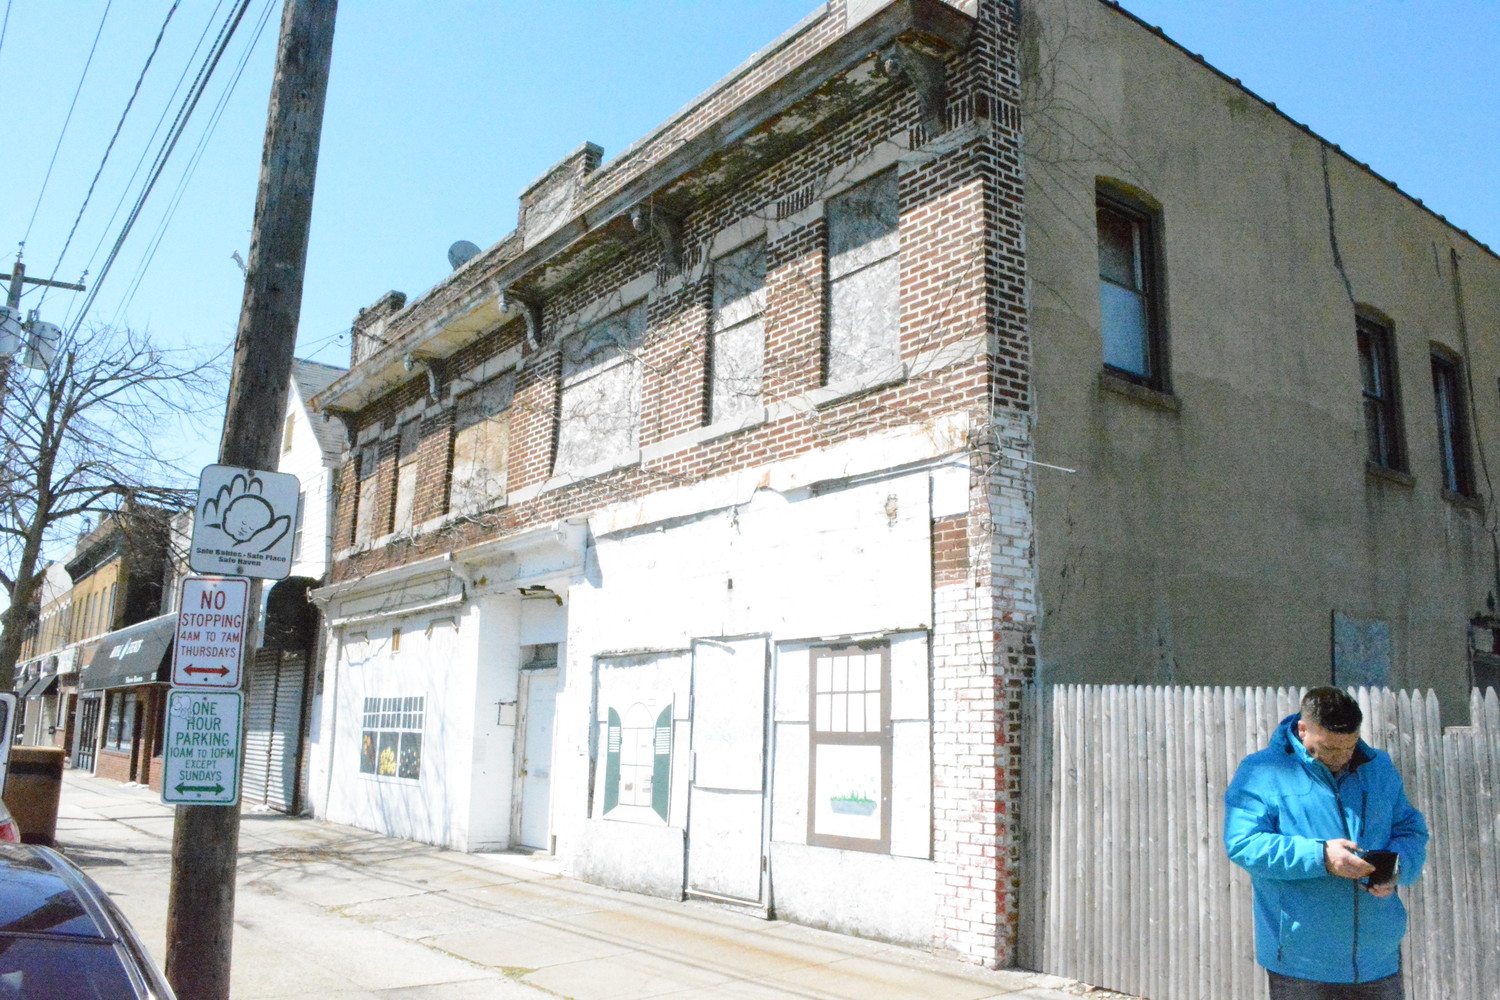 Town of Hempstead officials said they hope to reduce the number of vacant storefronts on Grand Avenue in Baldwin, above, through a revitalization effort.